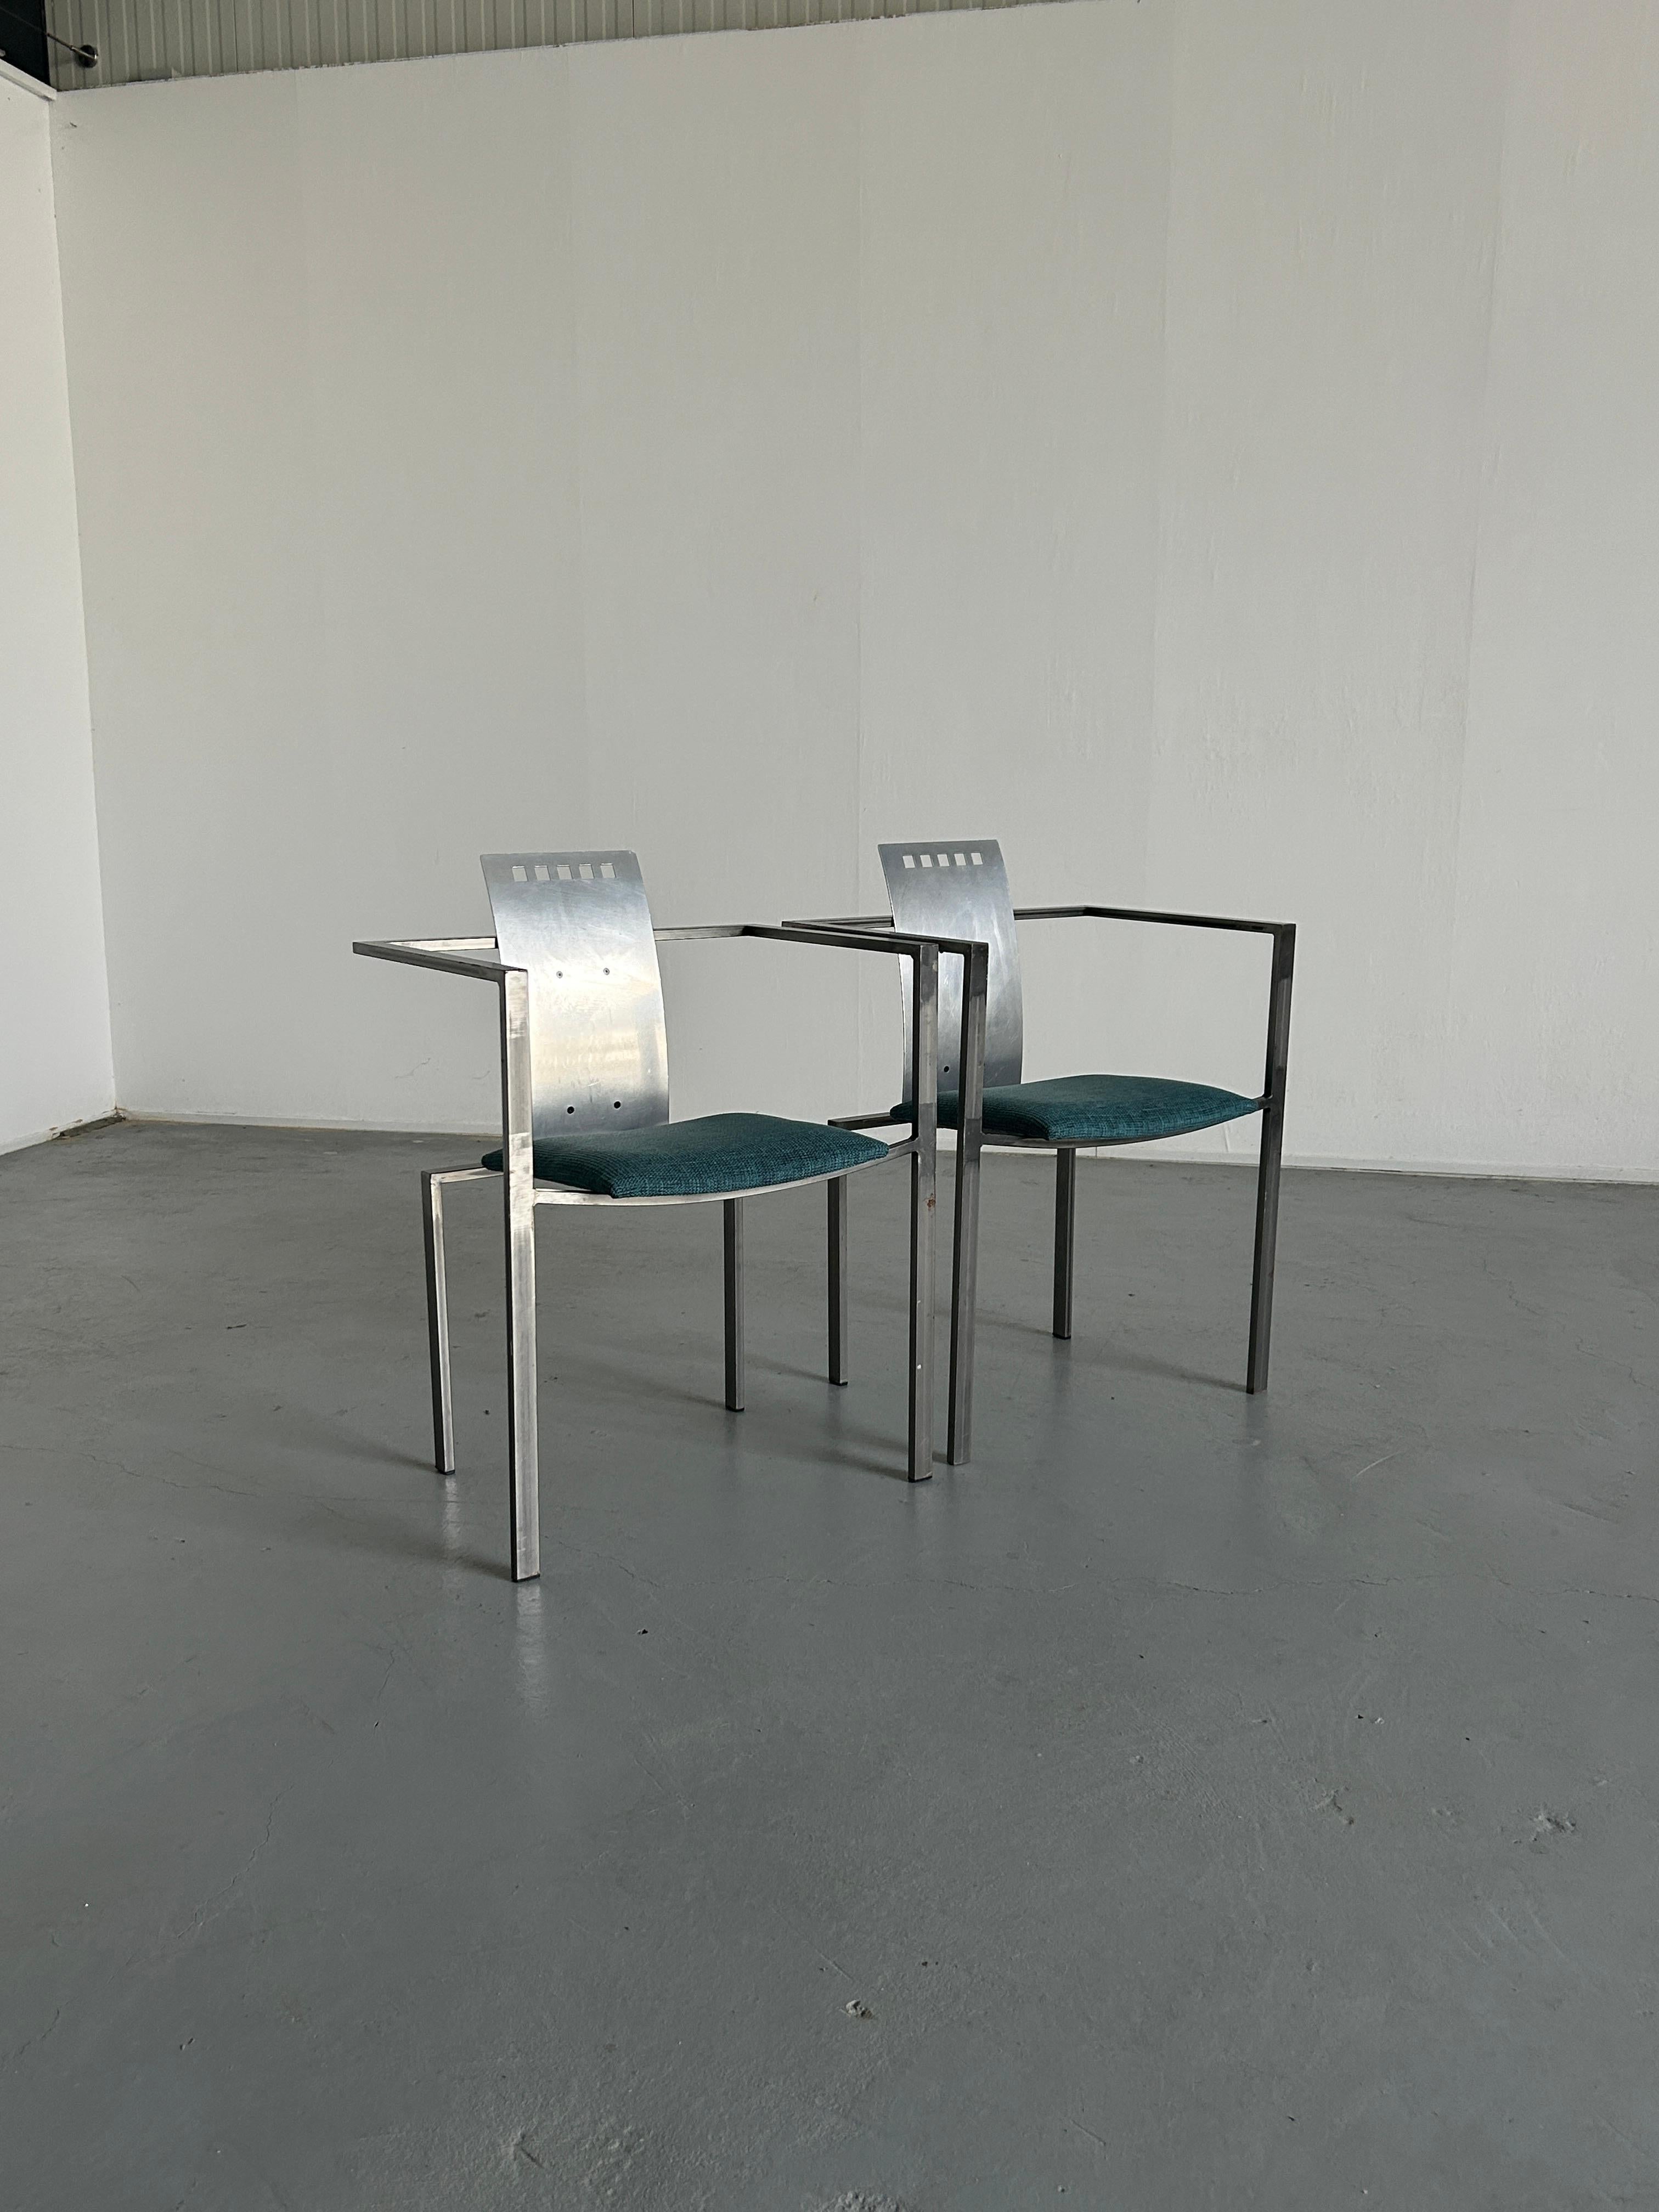 Late 20th Century 1 of 2 Memphis Design Postmodern Chairs by Karl Friedrich Förster for KFF, 1980s For Sale